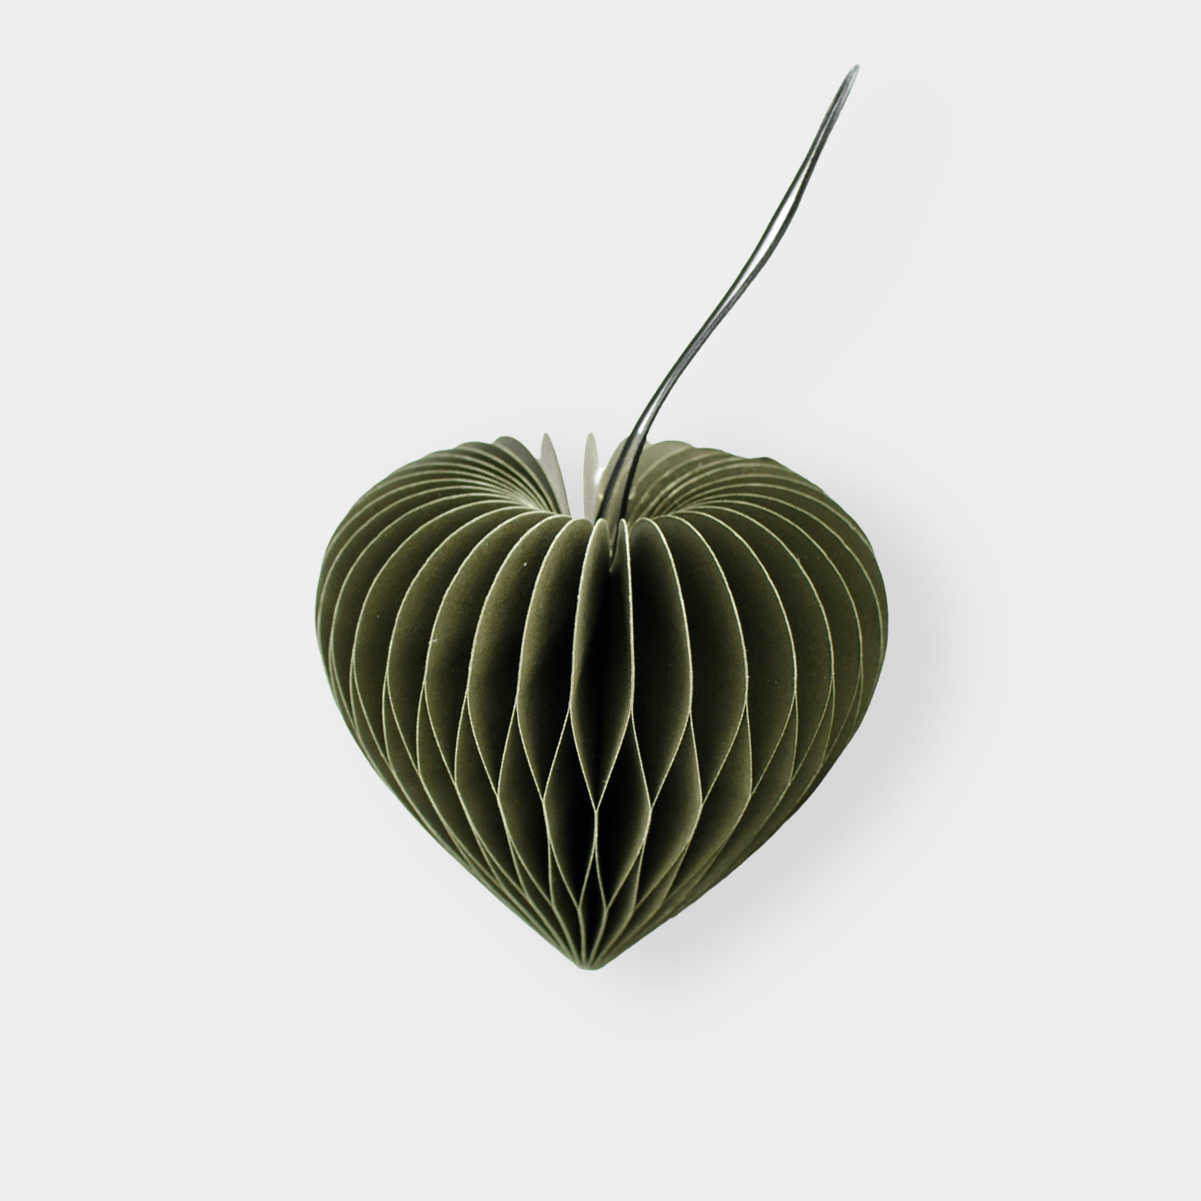 Nordic Rooms Christmas Decorations Paper Heart Ornament - Olive Green (7790876131577)